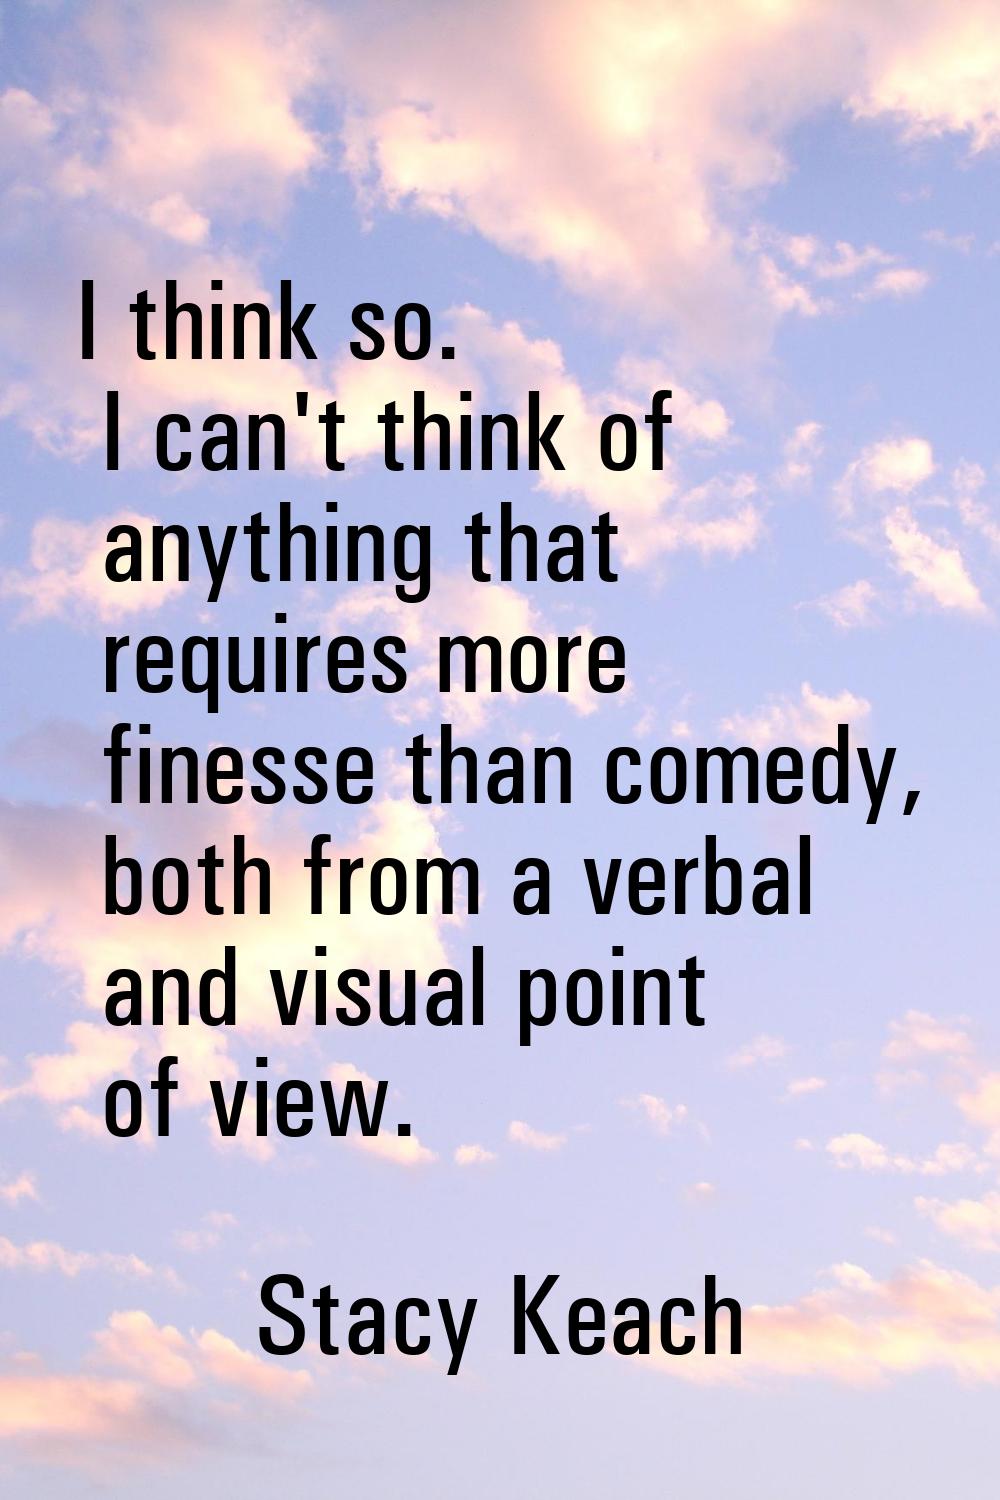 I think so. I can't think of anything that requires more finesse than comedy, both from a verbal an